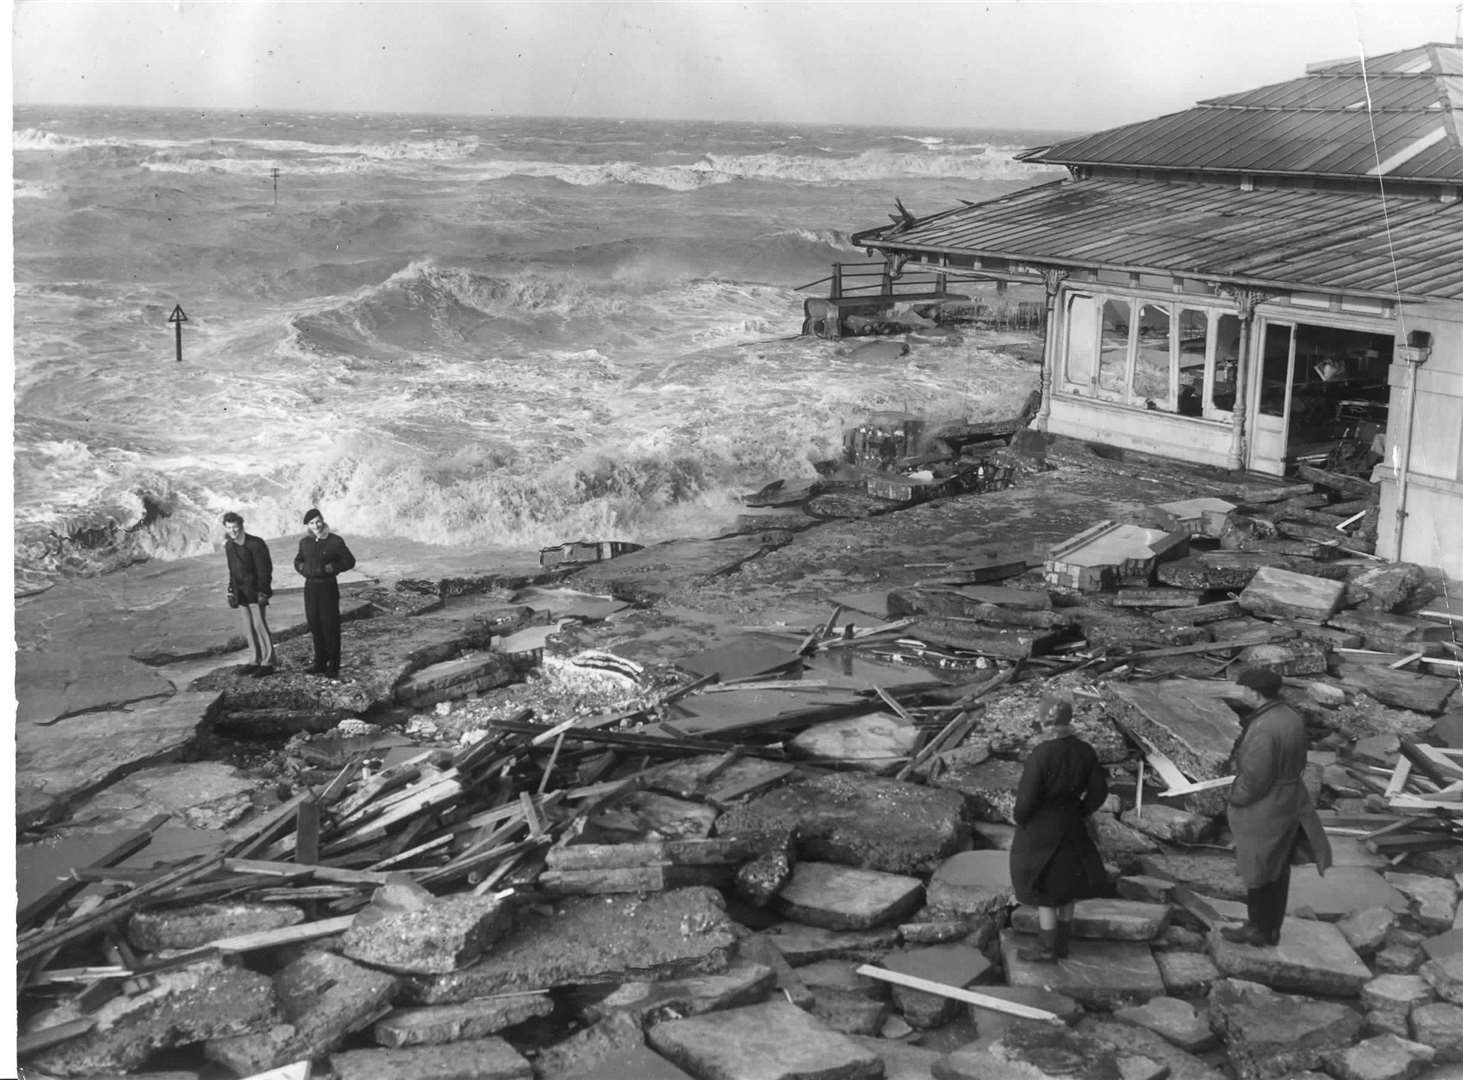 Margate after the floods of 1953